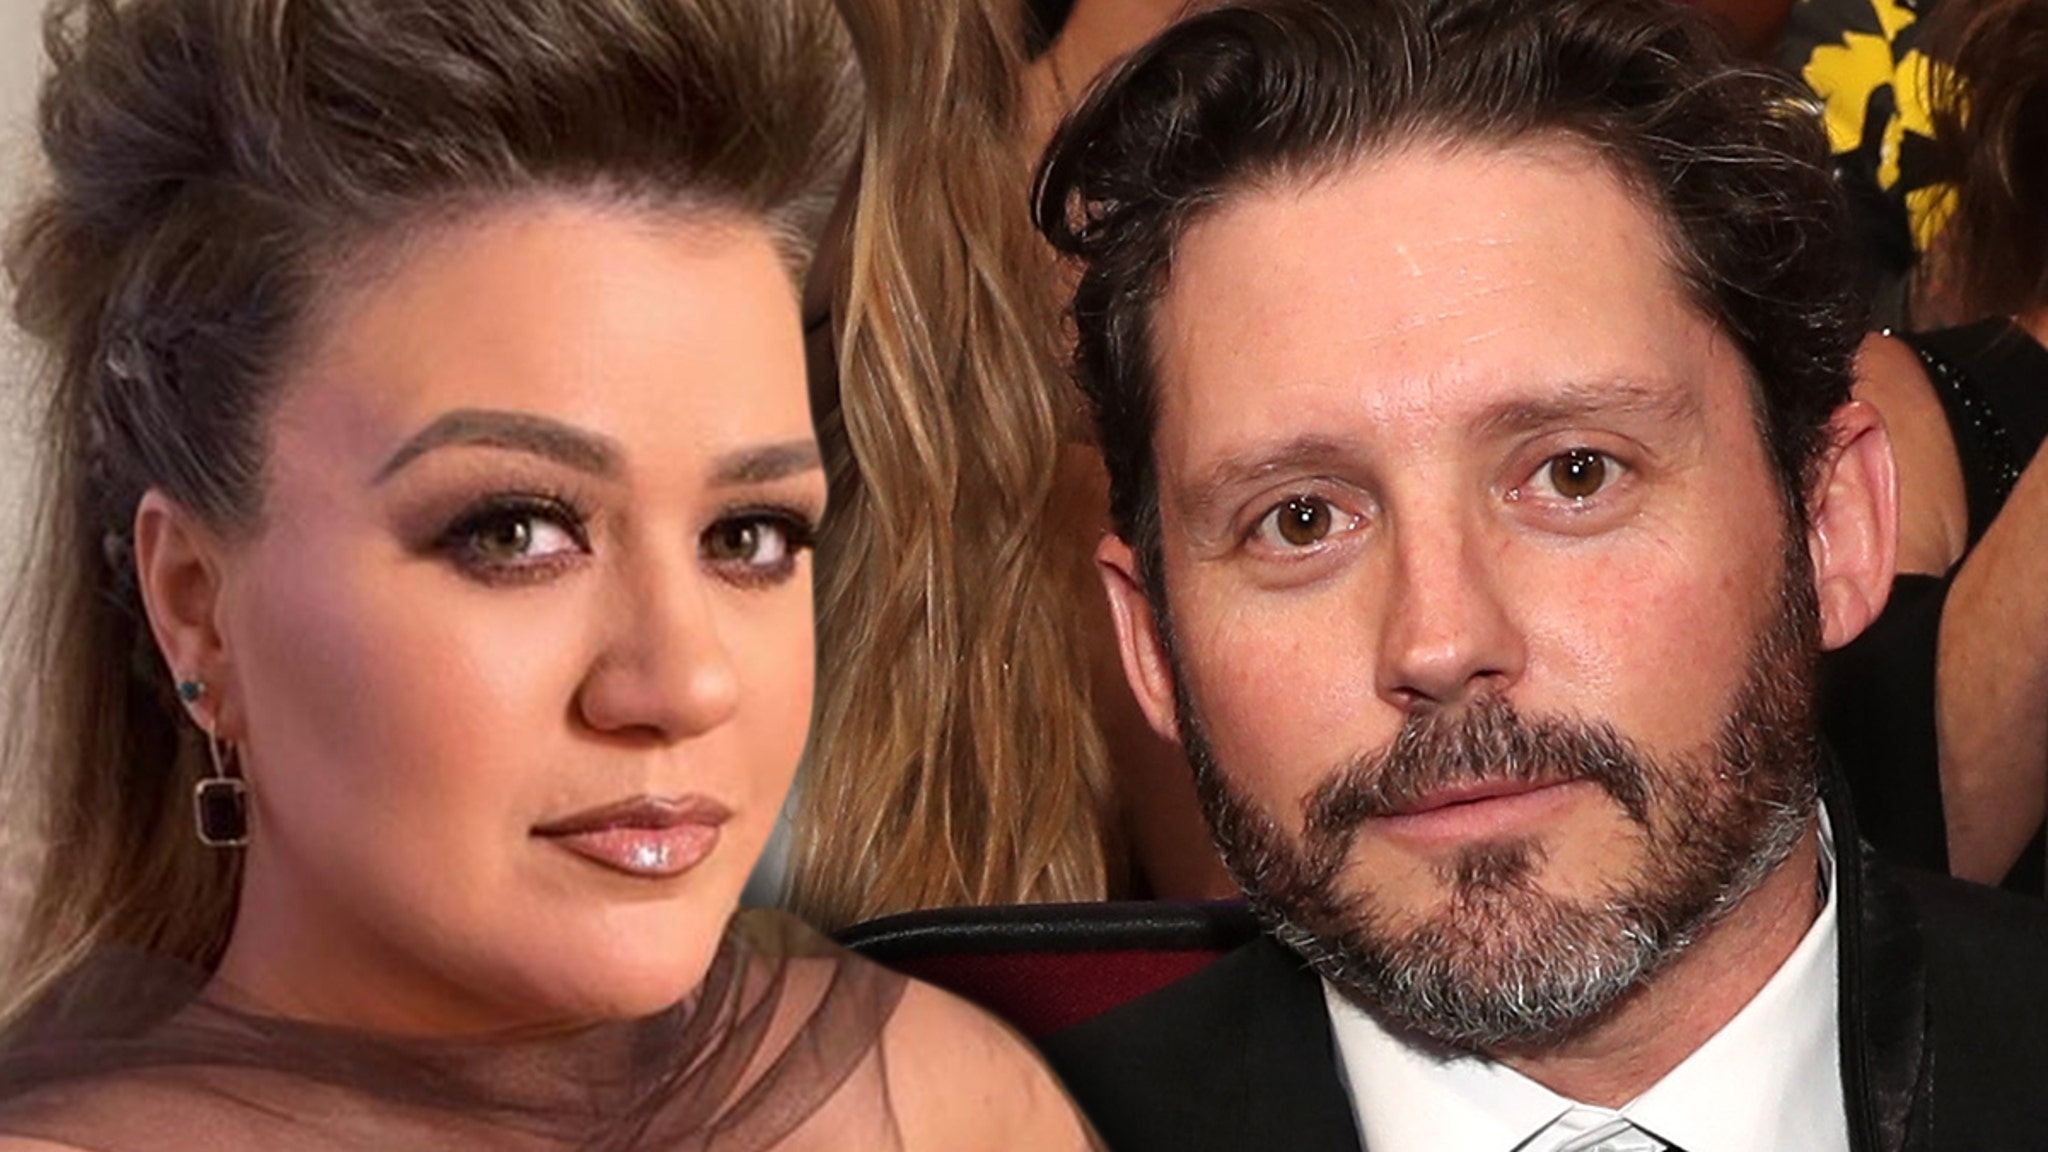 Kelly Clarkson Wants to Sell Montana Ranch Where Estranged Husband Living